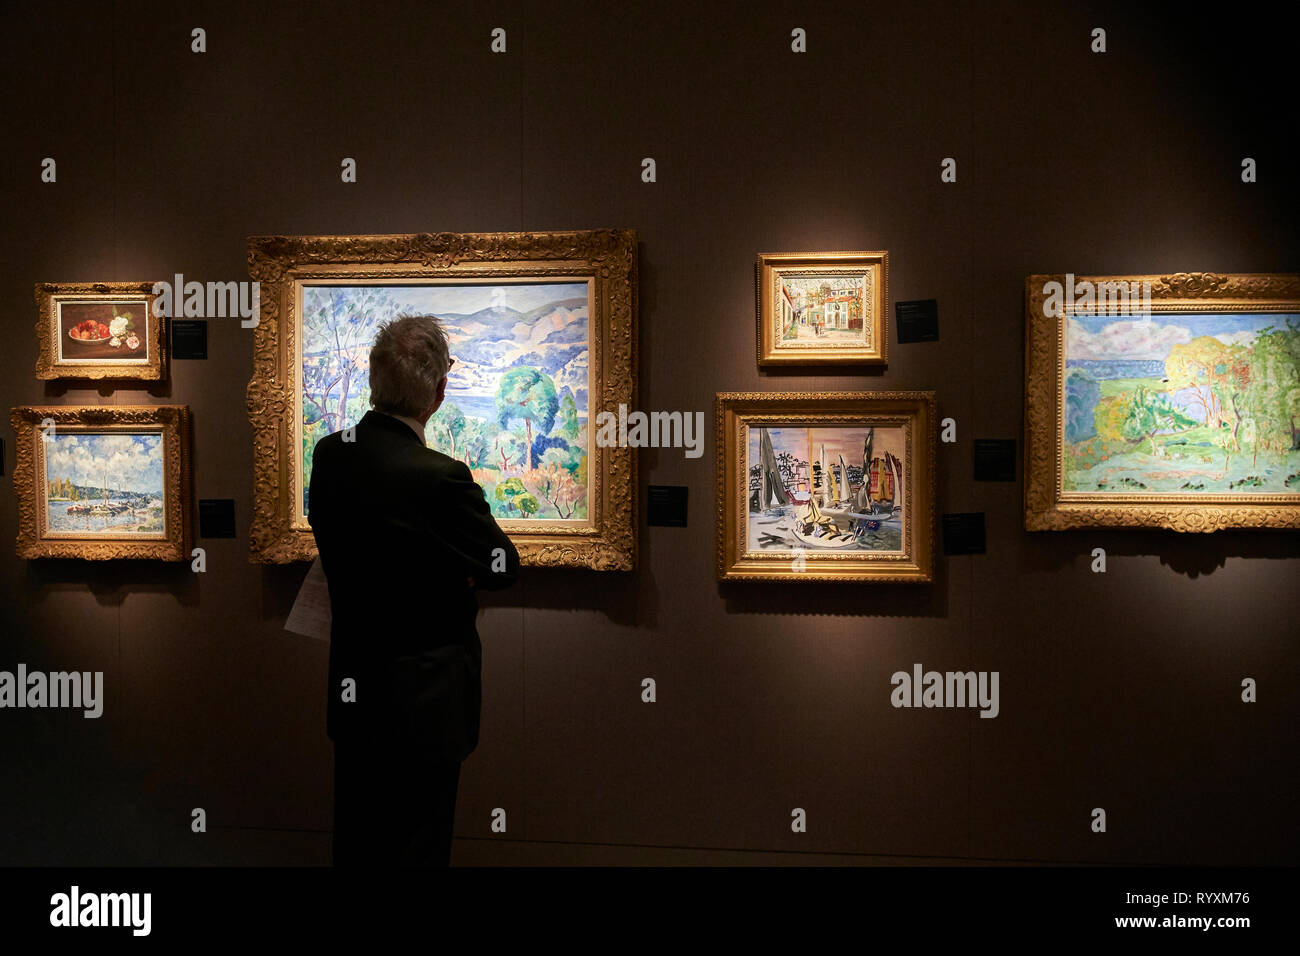 A visitor observes the paintings exhibited in one of the galleries participating in TEFAF. TEFAF (The European Fine Art Fair), one of the most famous art, antiques and design fairs in the world, is held once again this year. Every year, Maastricht hosts an event that brings together 275 galleries some twenty countries, about 30.000 exhibited art objects and has more than 75,000 attendees each year. Stock Photo